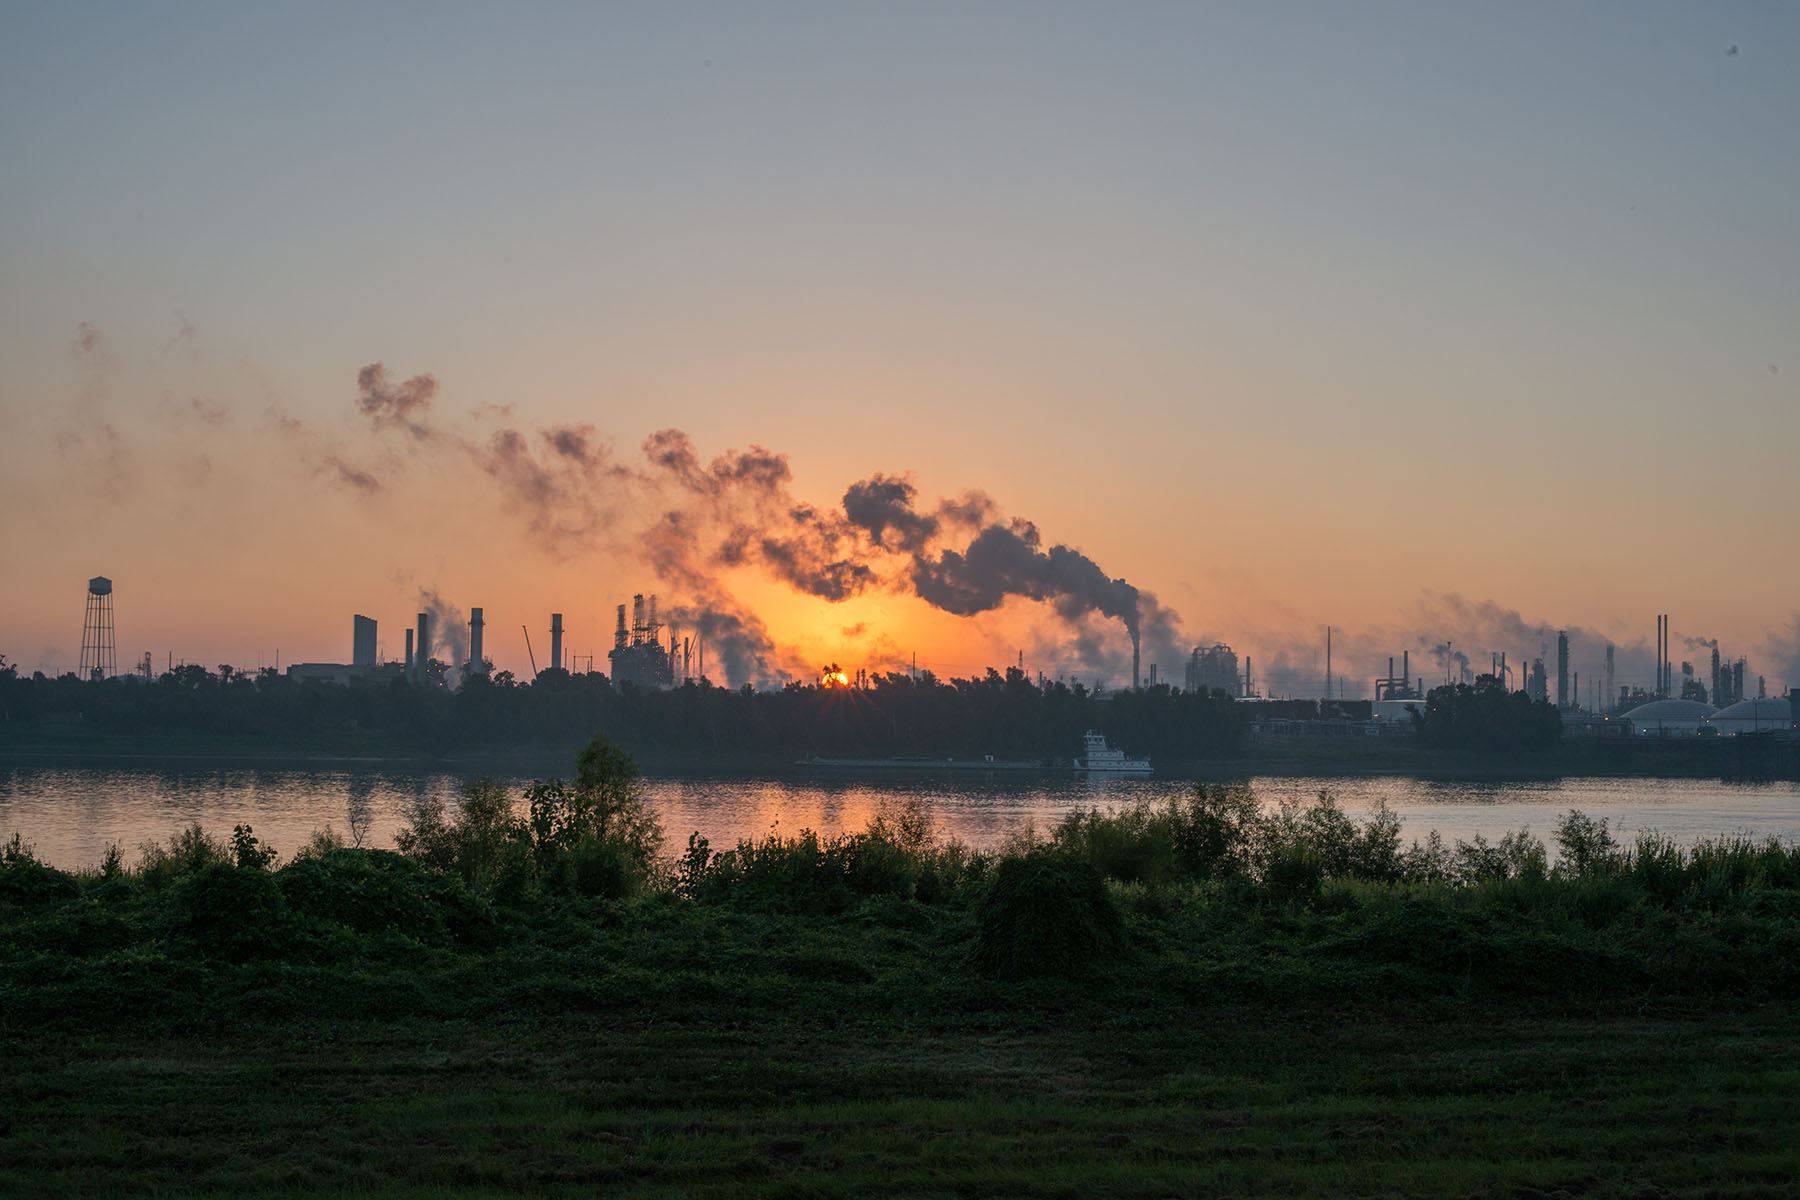 Smoke billows from one of many chemical plants near Baton Rouge, Louisiana in "Cancer Alley," one of the most polluted areas in the United States.